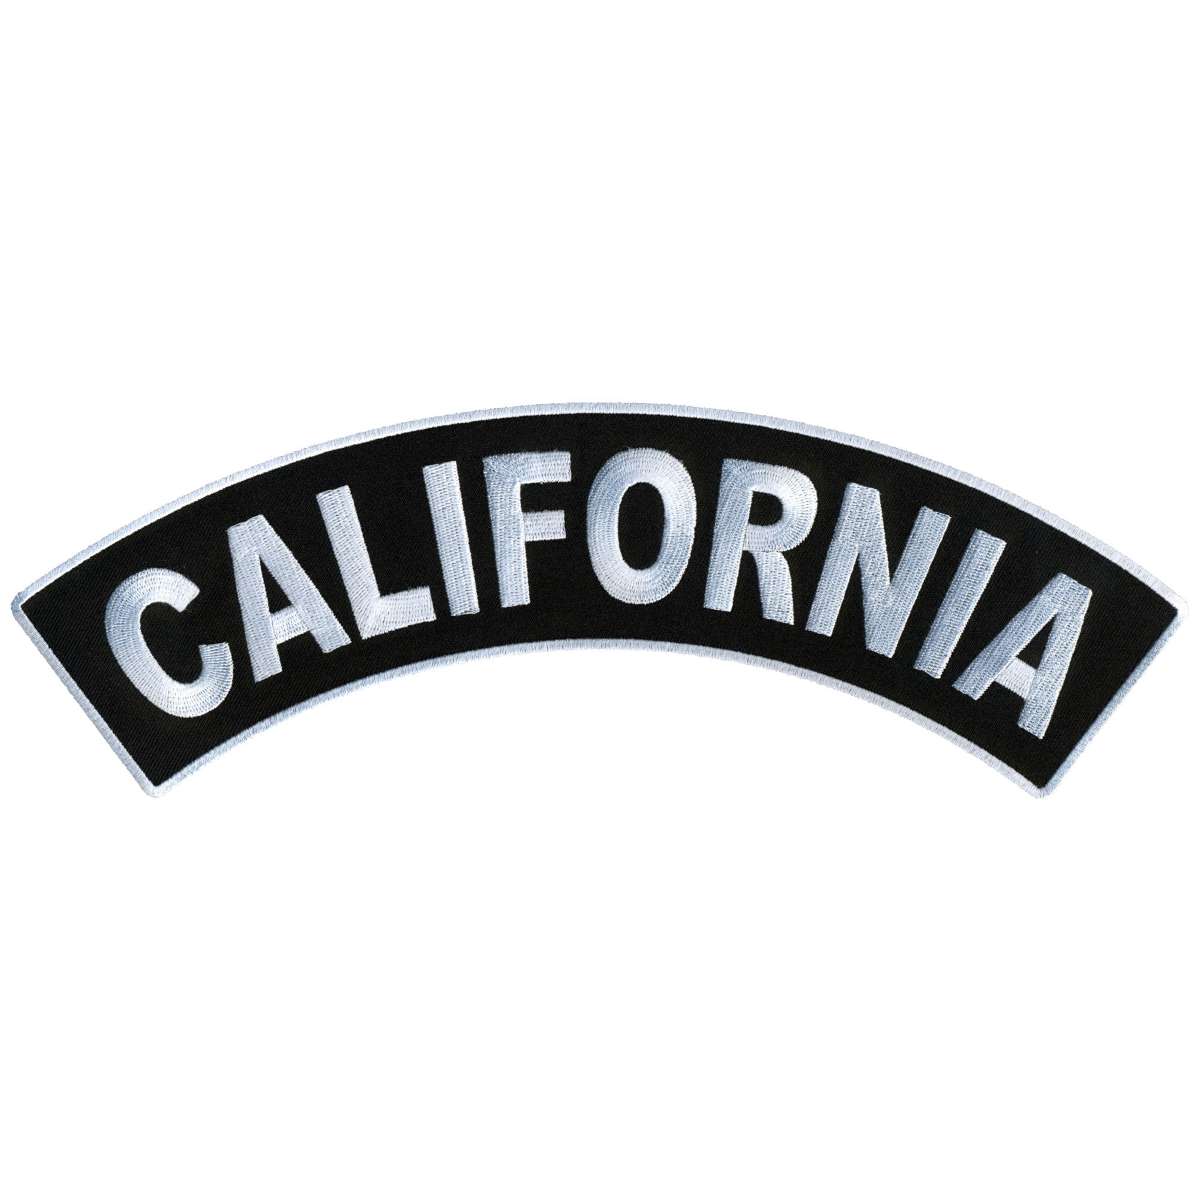 Hot Leathers California 12” X 3” Top Rocker Patch PPM4009